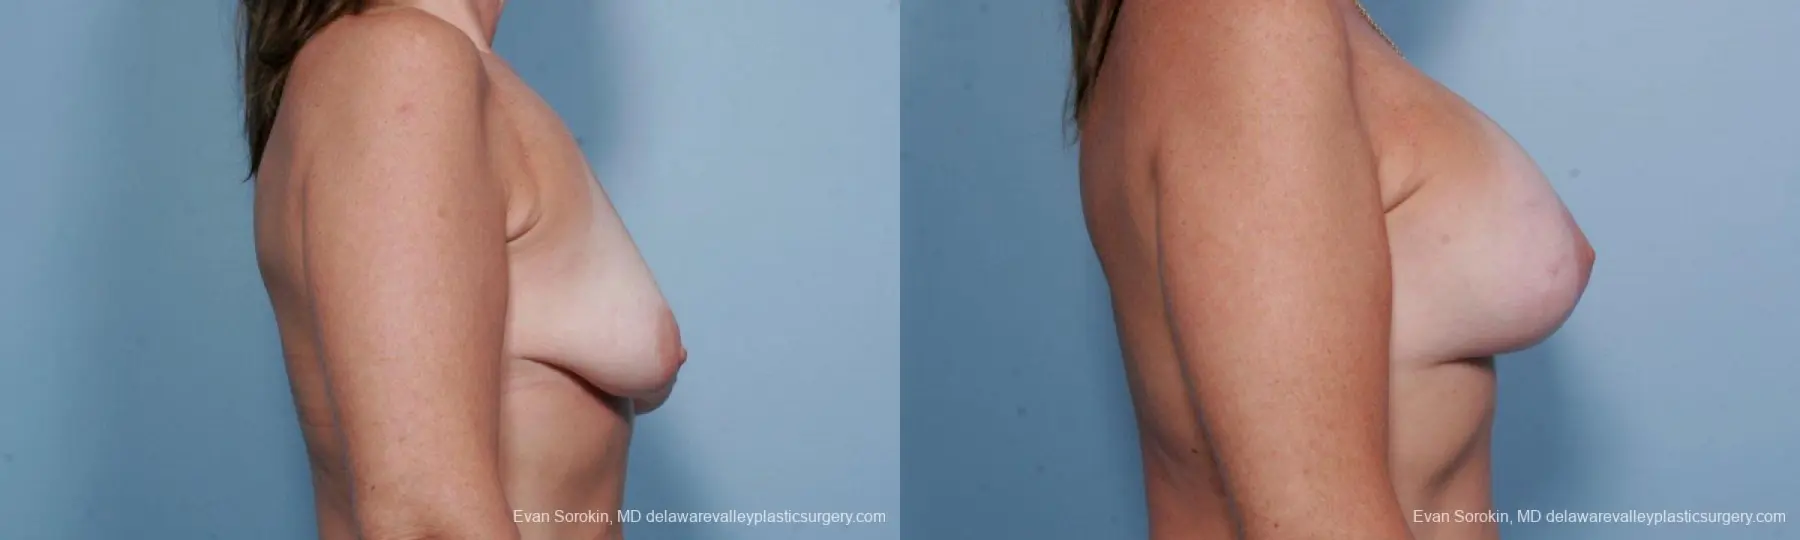 Philadelphia Breast Lift and Augmentation 9438 - Before and After 3